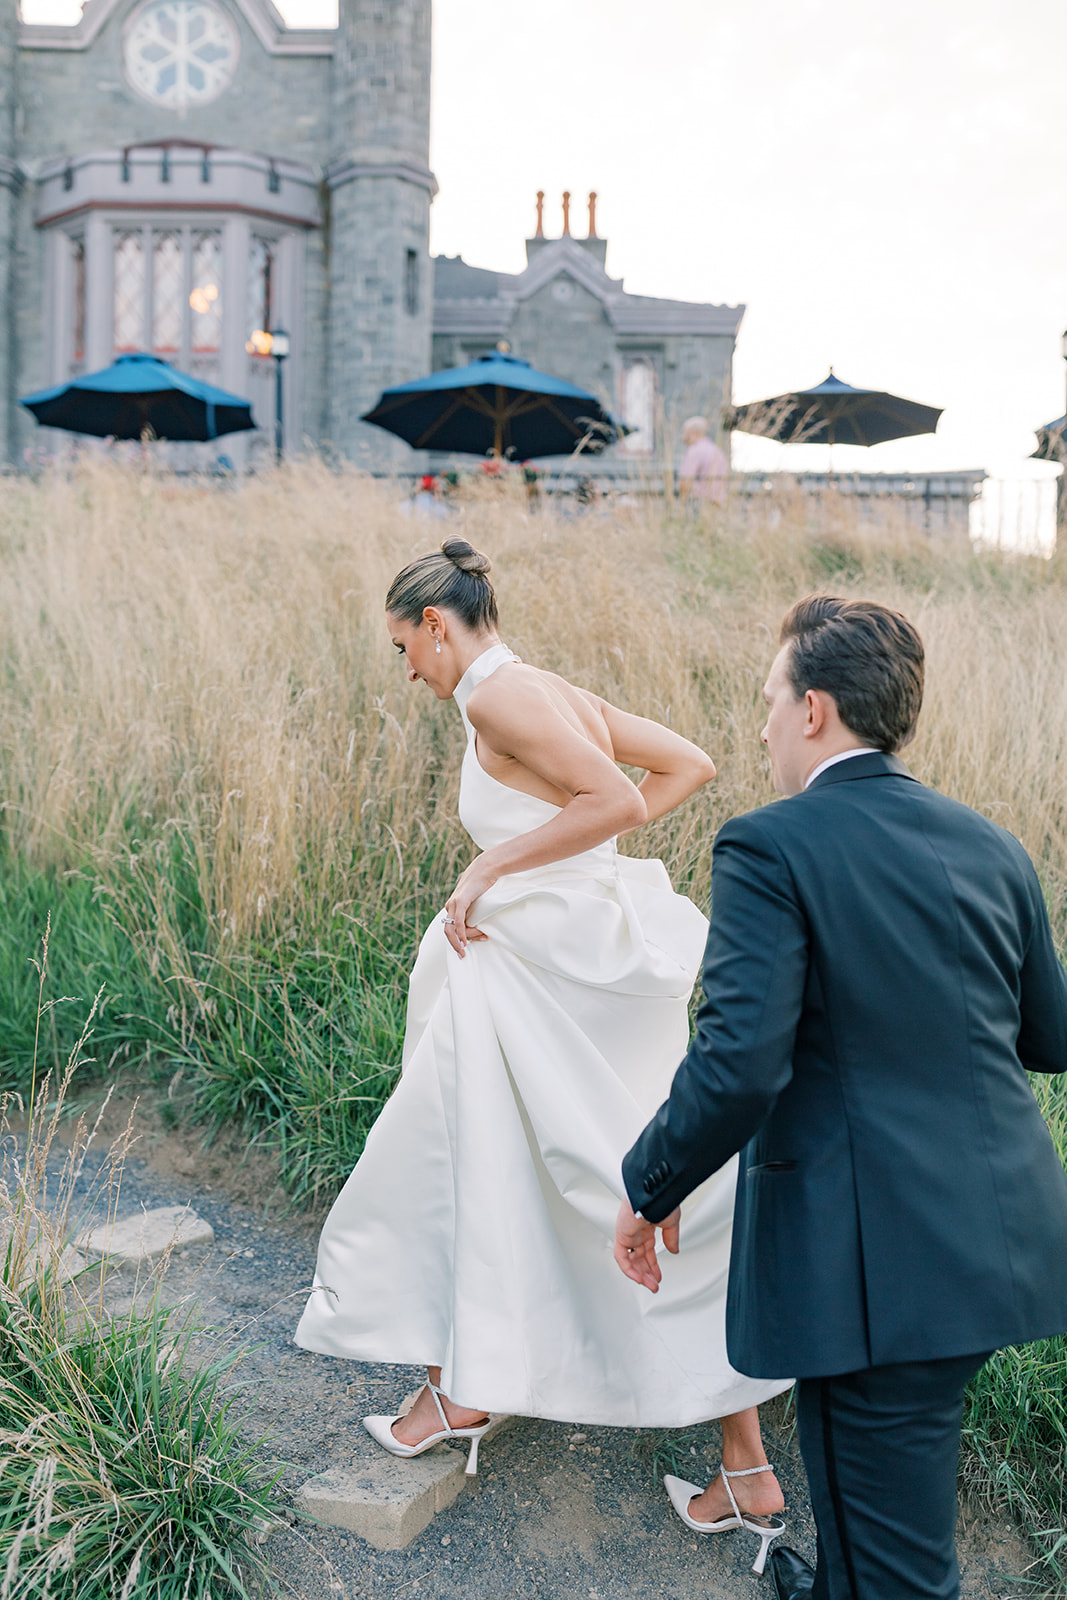 married portrait at whitby castle rye ny